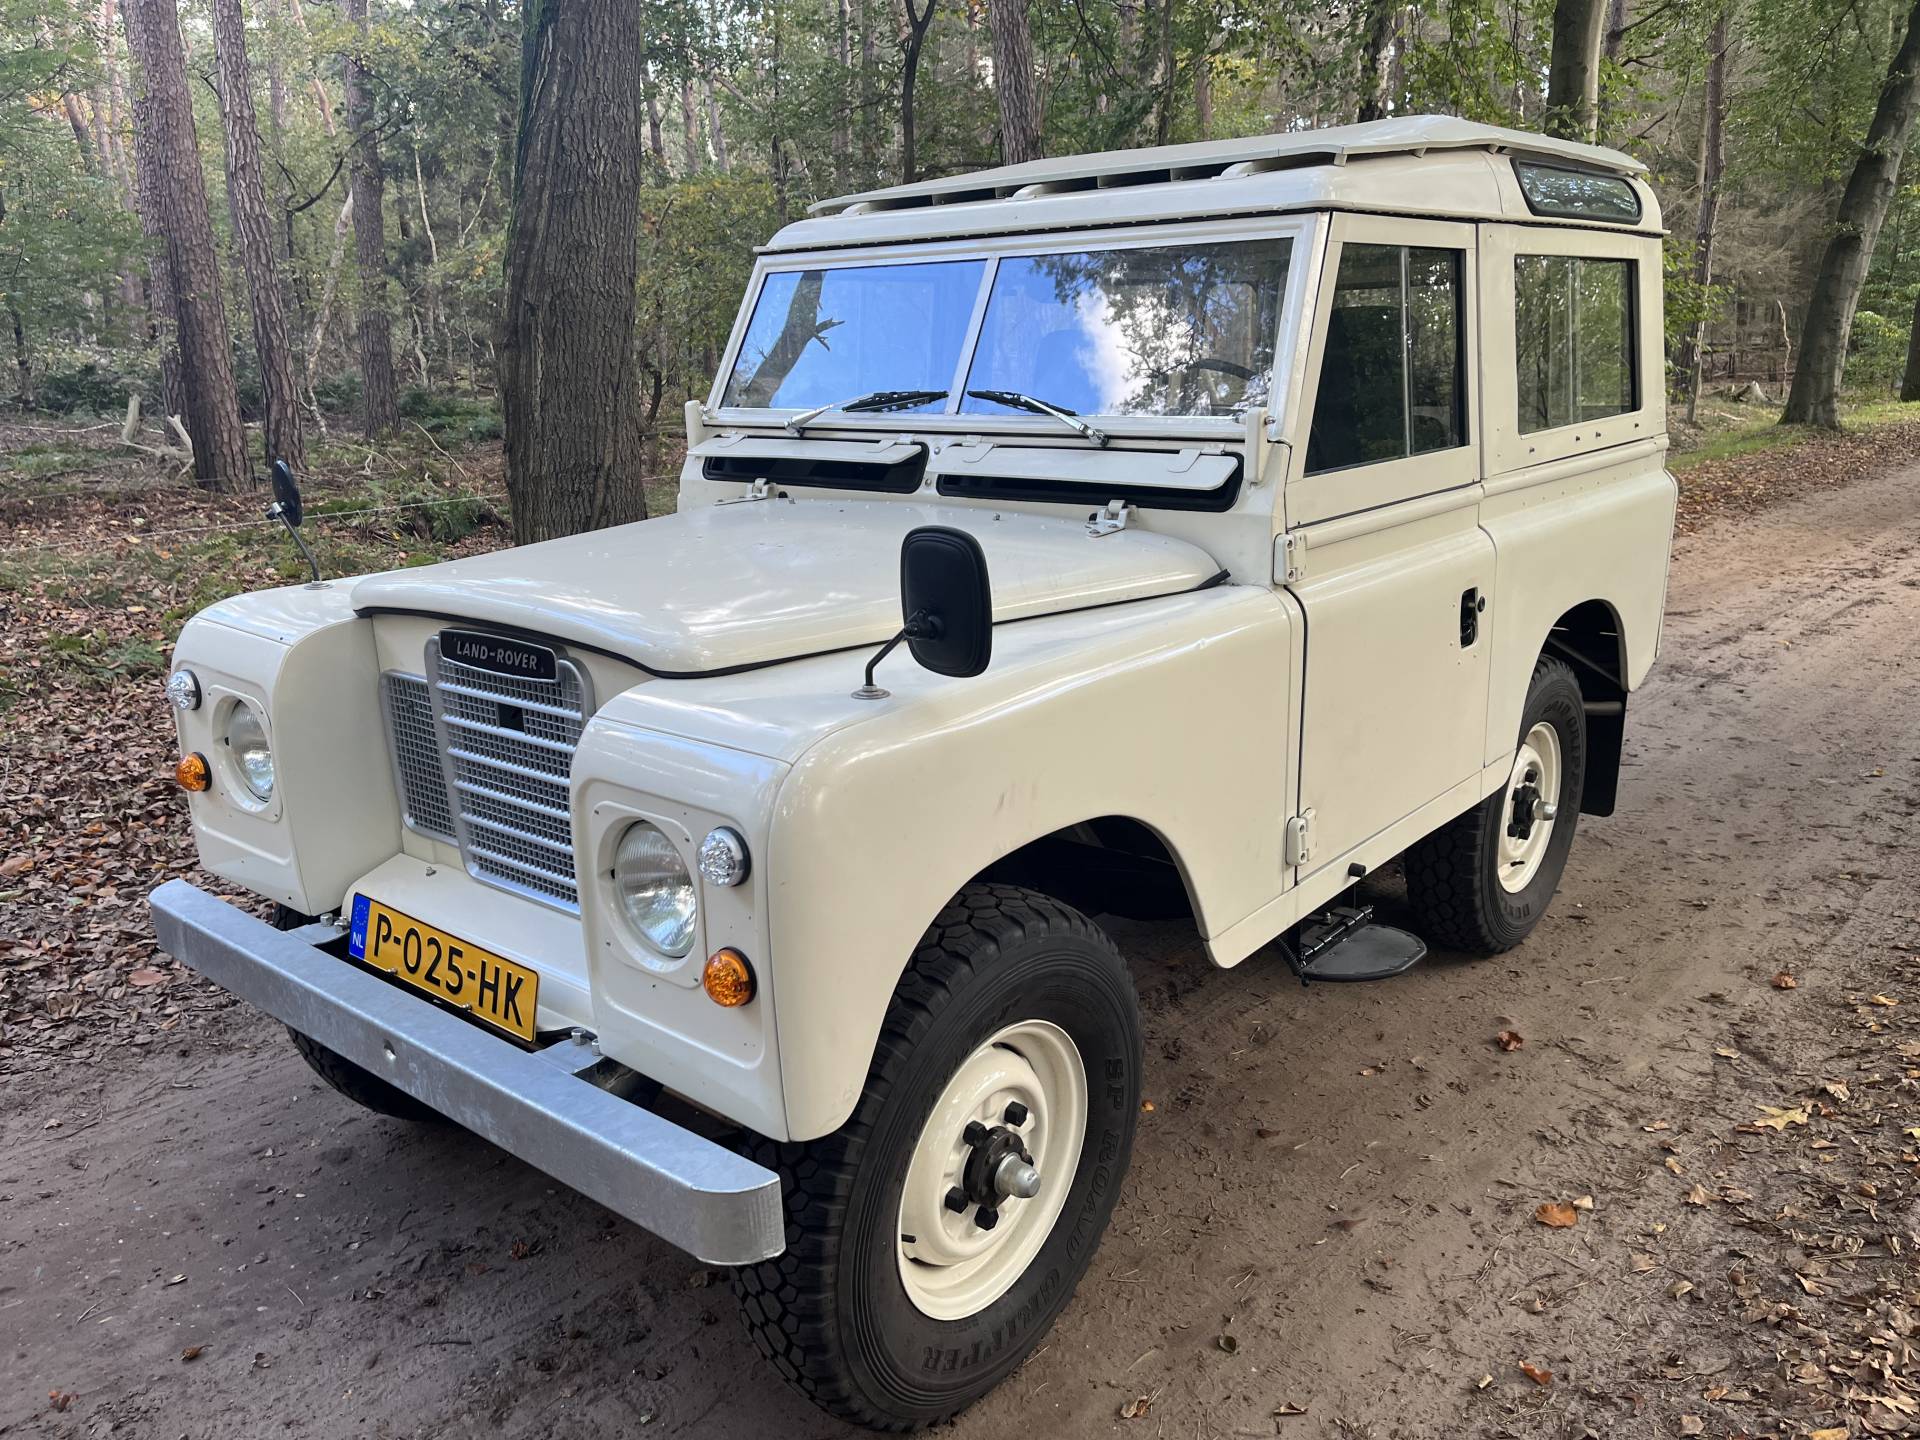 Land Rover 88 Classic Cars for Sale - Classic Trader